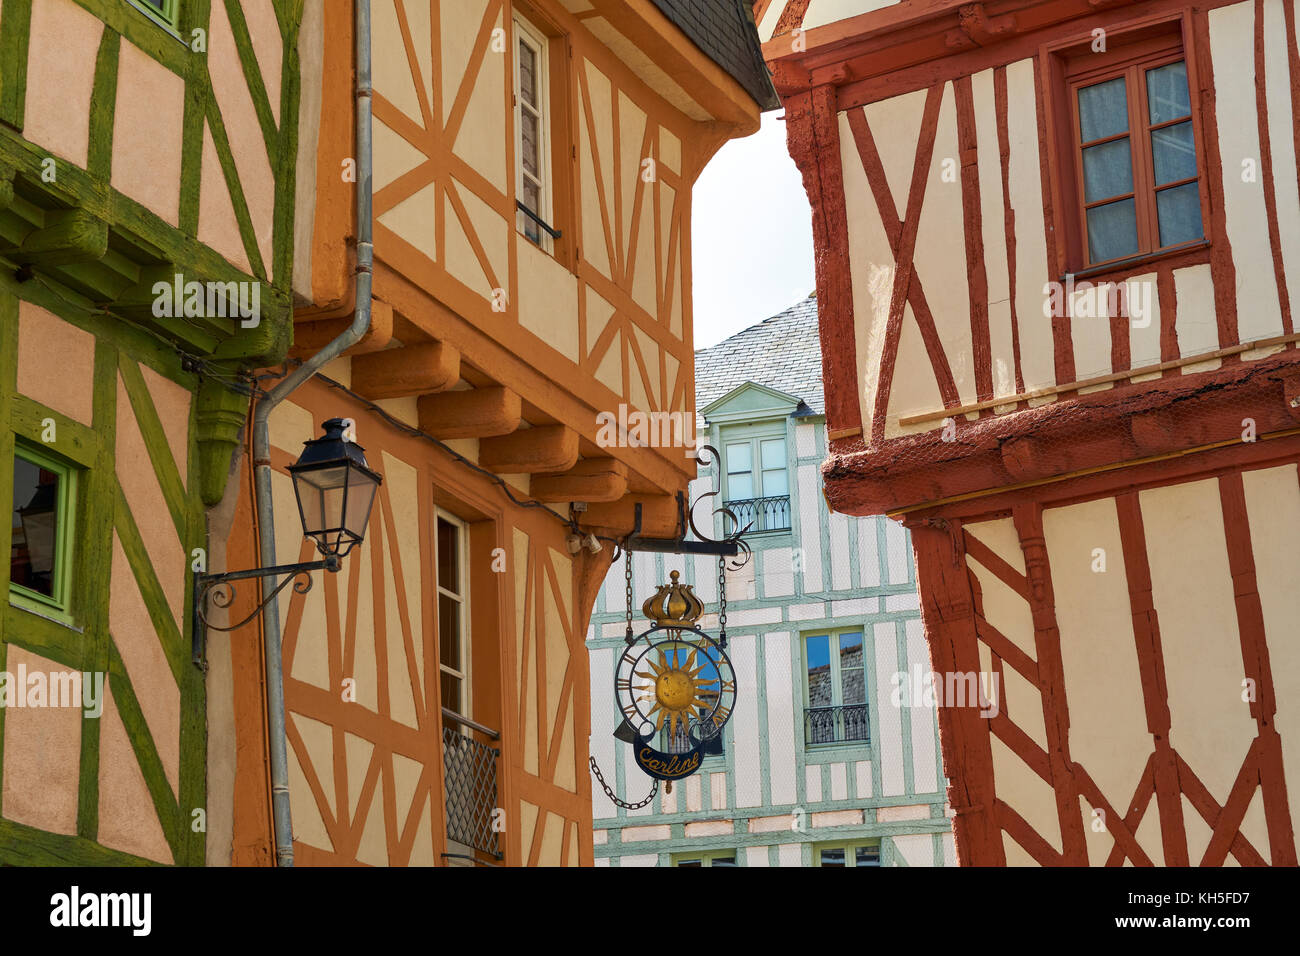 The walled medieval town of Vannes in Morbihan Brittany France. Stock Photo